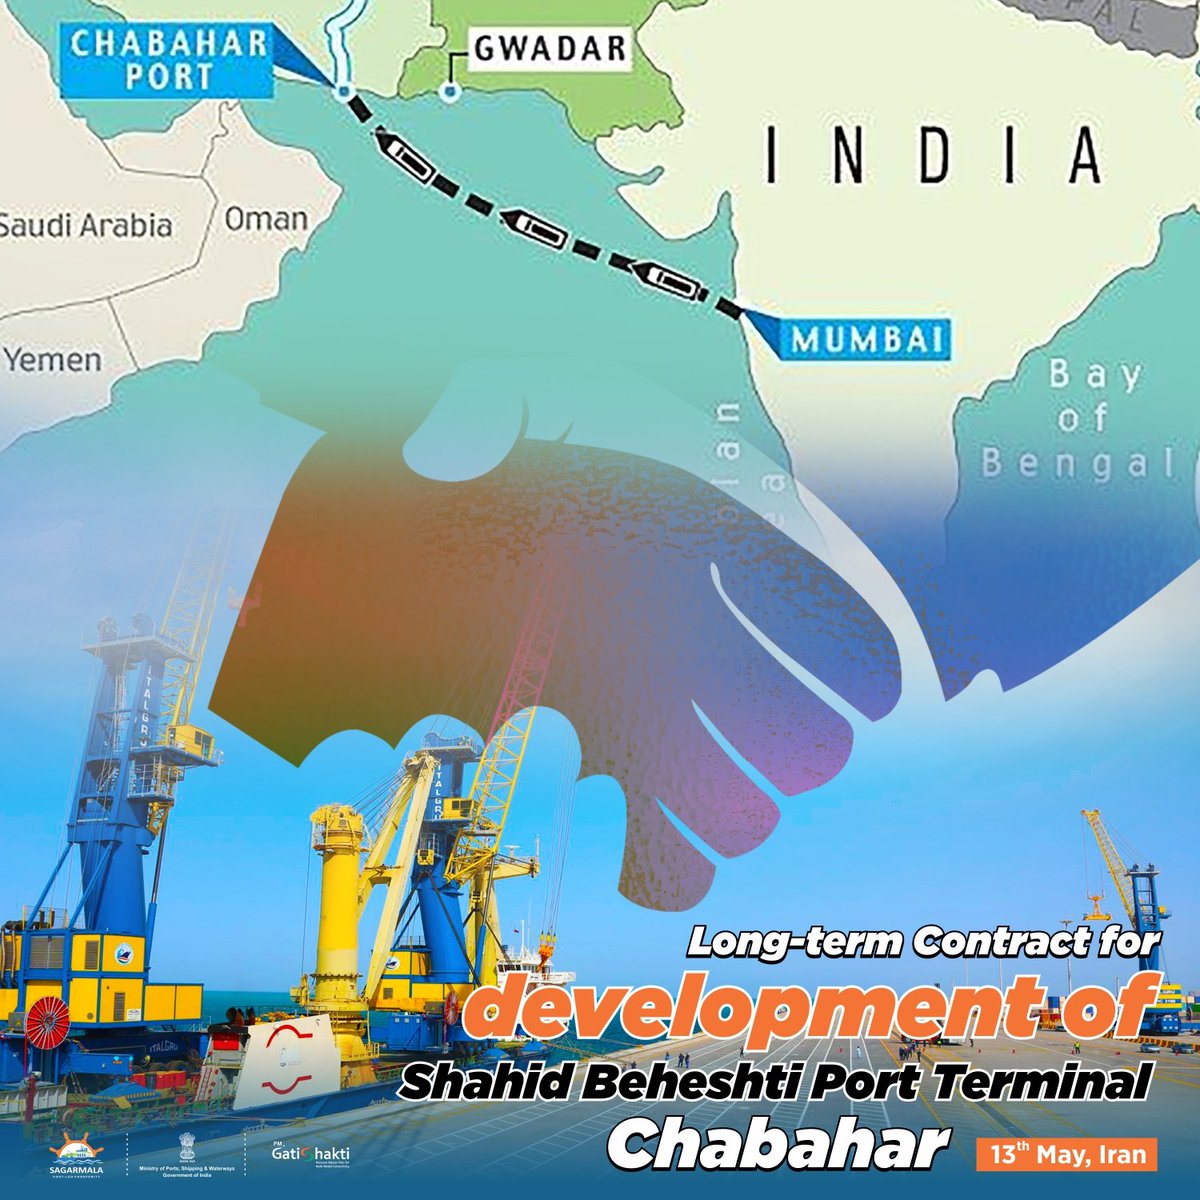 Today, a Long-term Contract for development of Shahid Beheshti Port Terminal, Chabahar, an India-Iran flagship project, was signed between IPGL & Ports & Maritime Organization of Iran. Chabahar Port is a gateway for trade with Afghanistan & broader Central Asian countries.